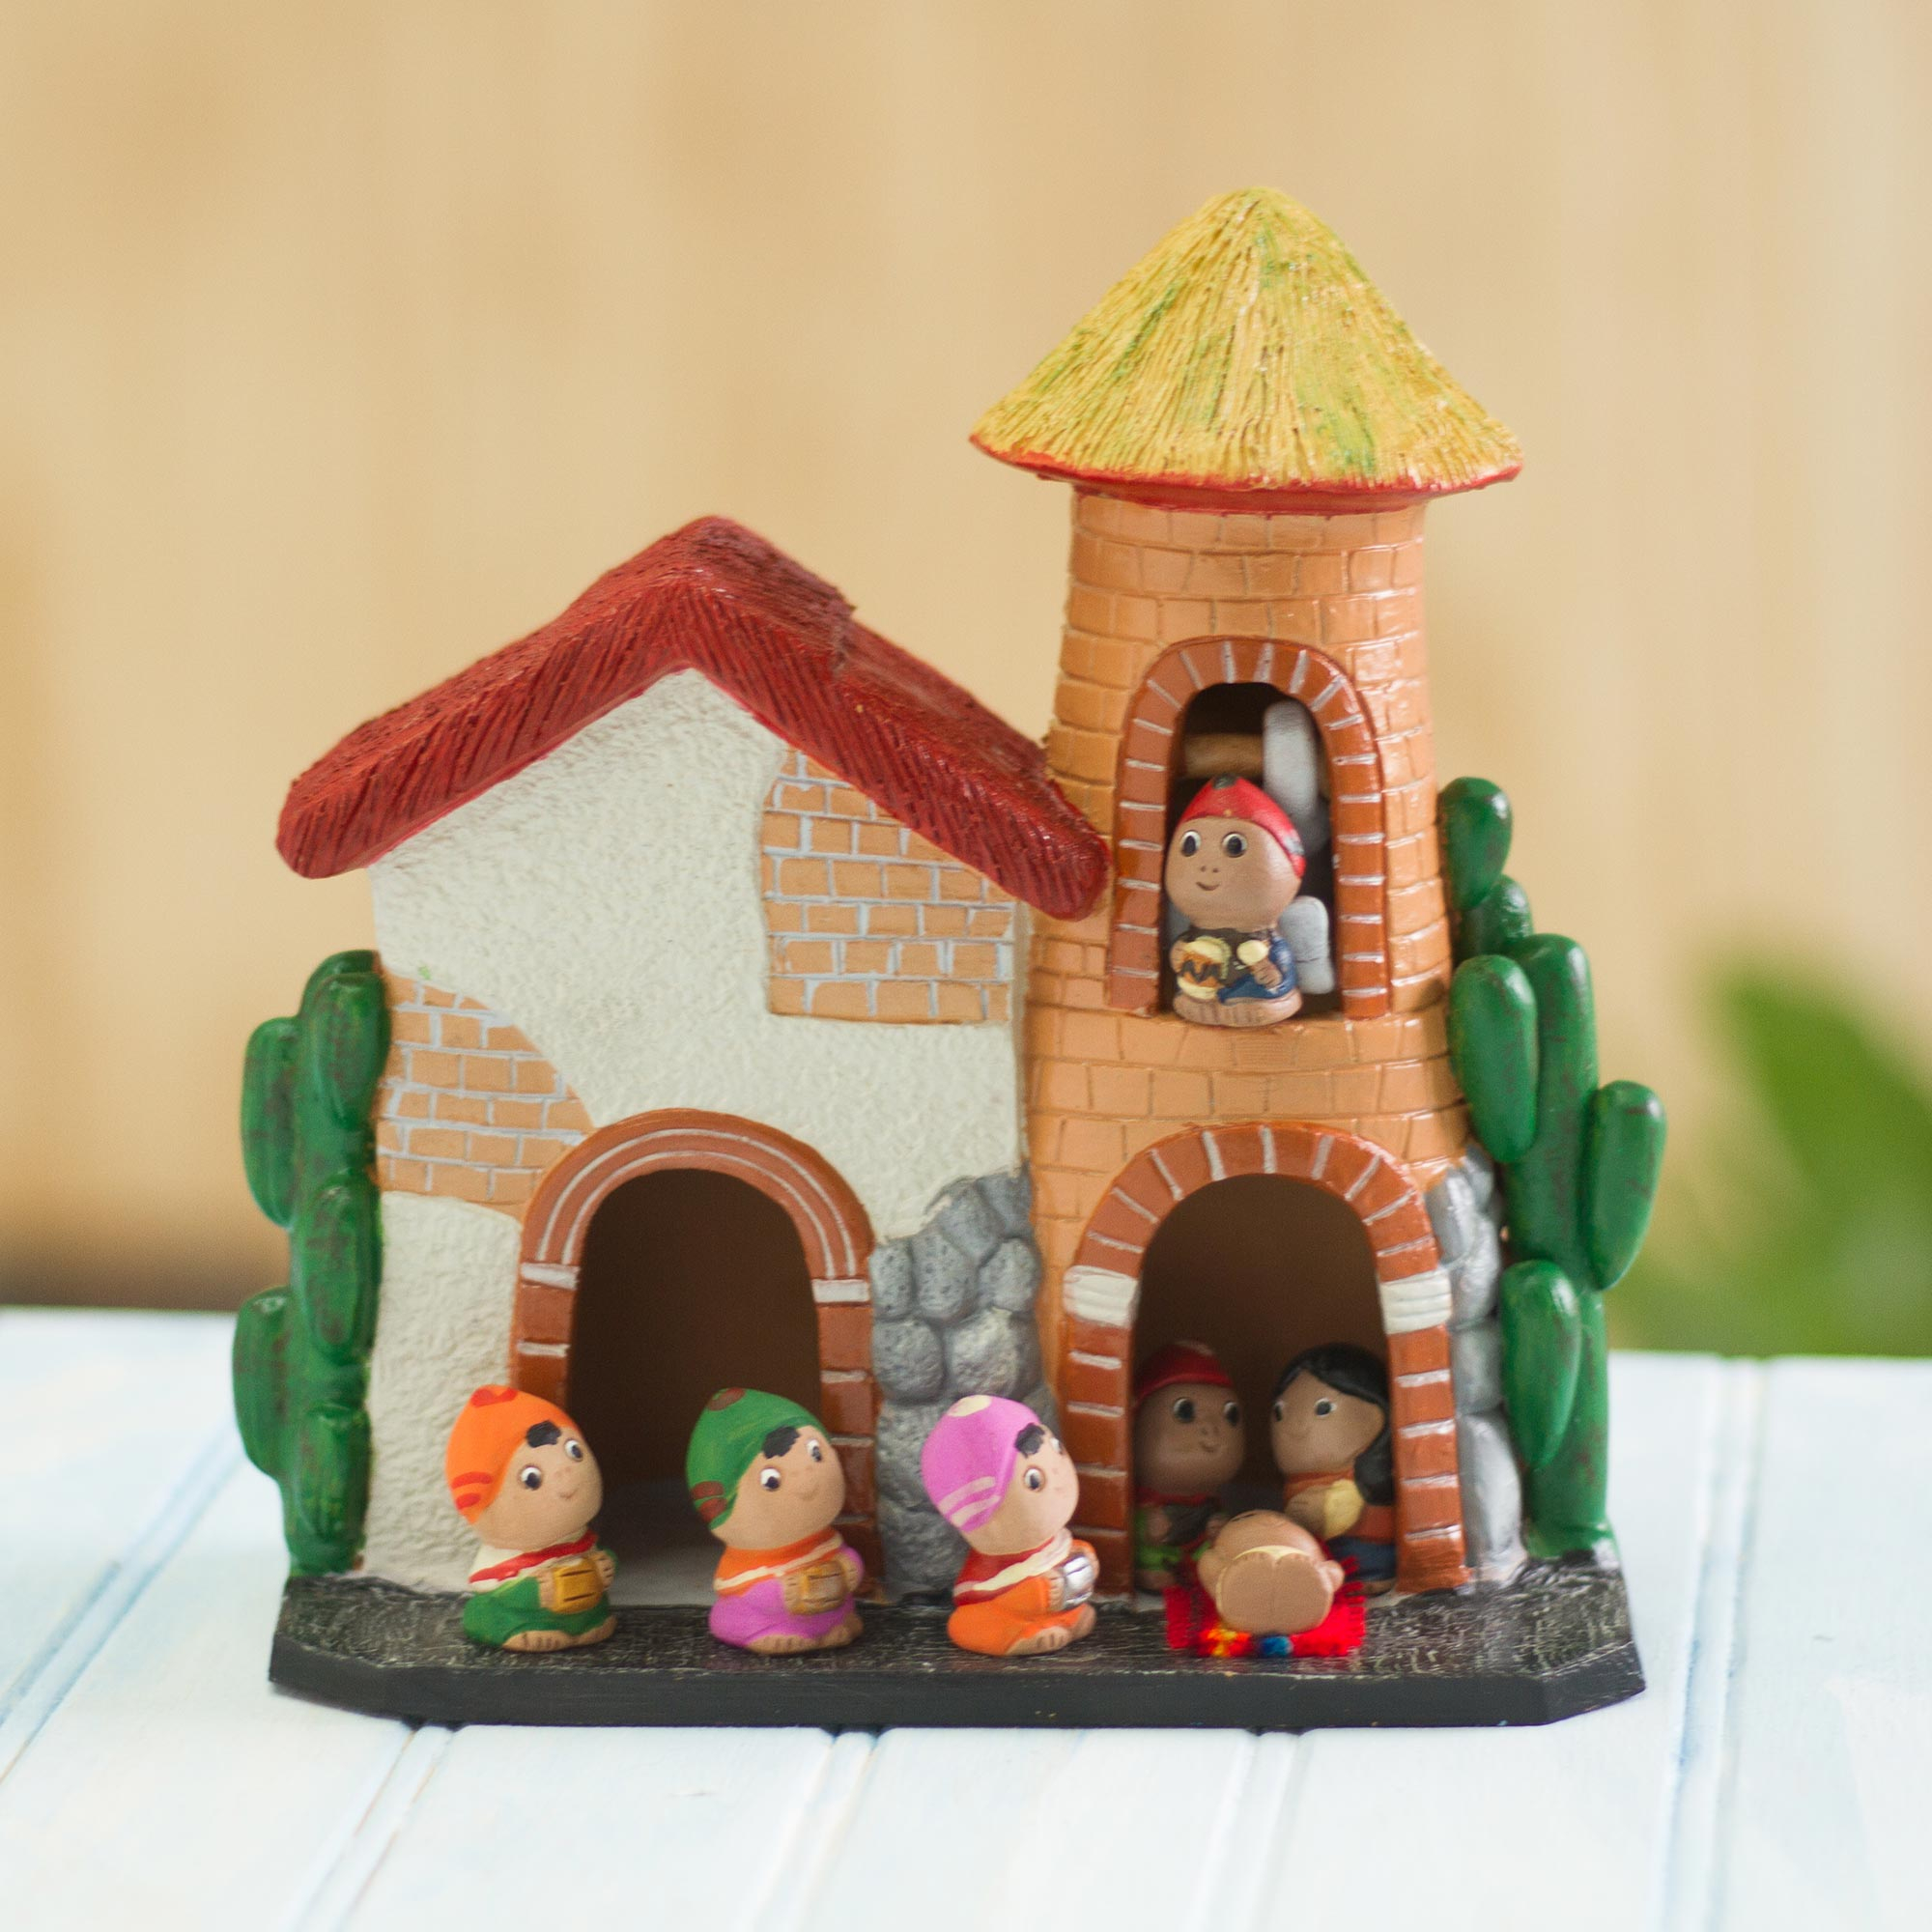 Andean-Themed Ceramic Nativity Scene Sculpture from Peru,'Birth of the Andes'